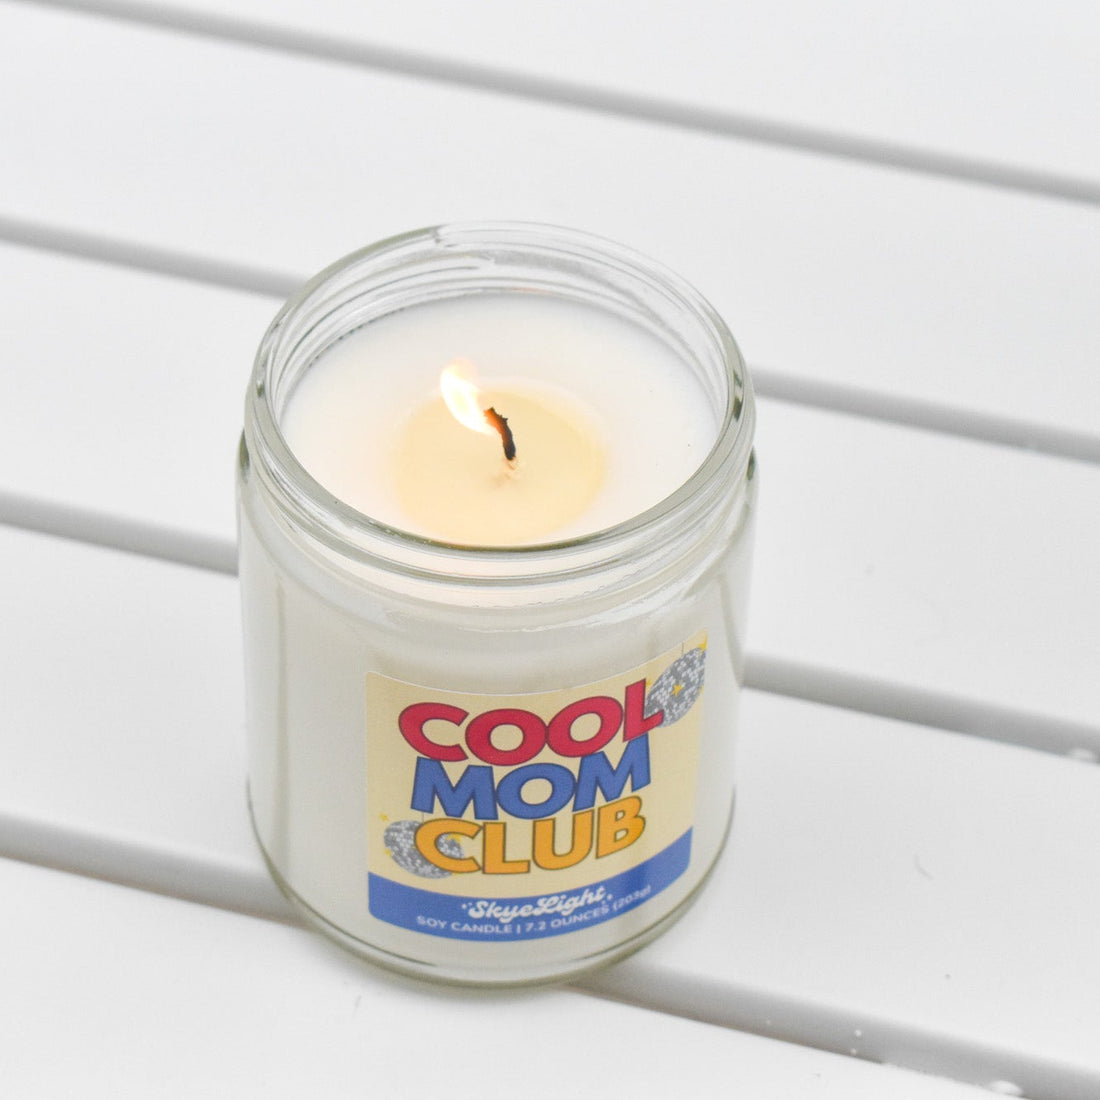 Cool Mom Candle